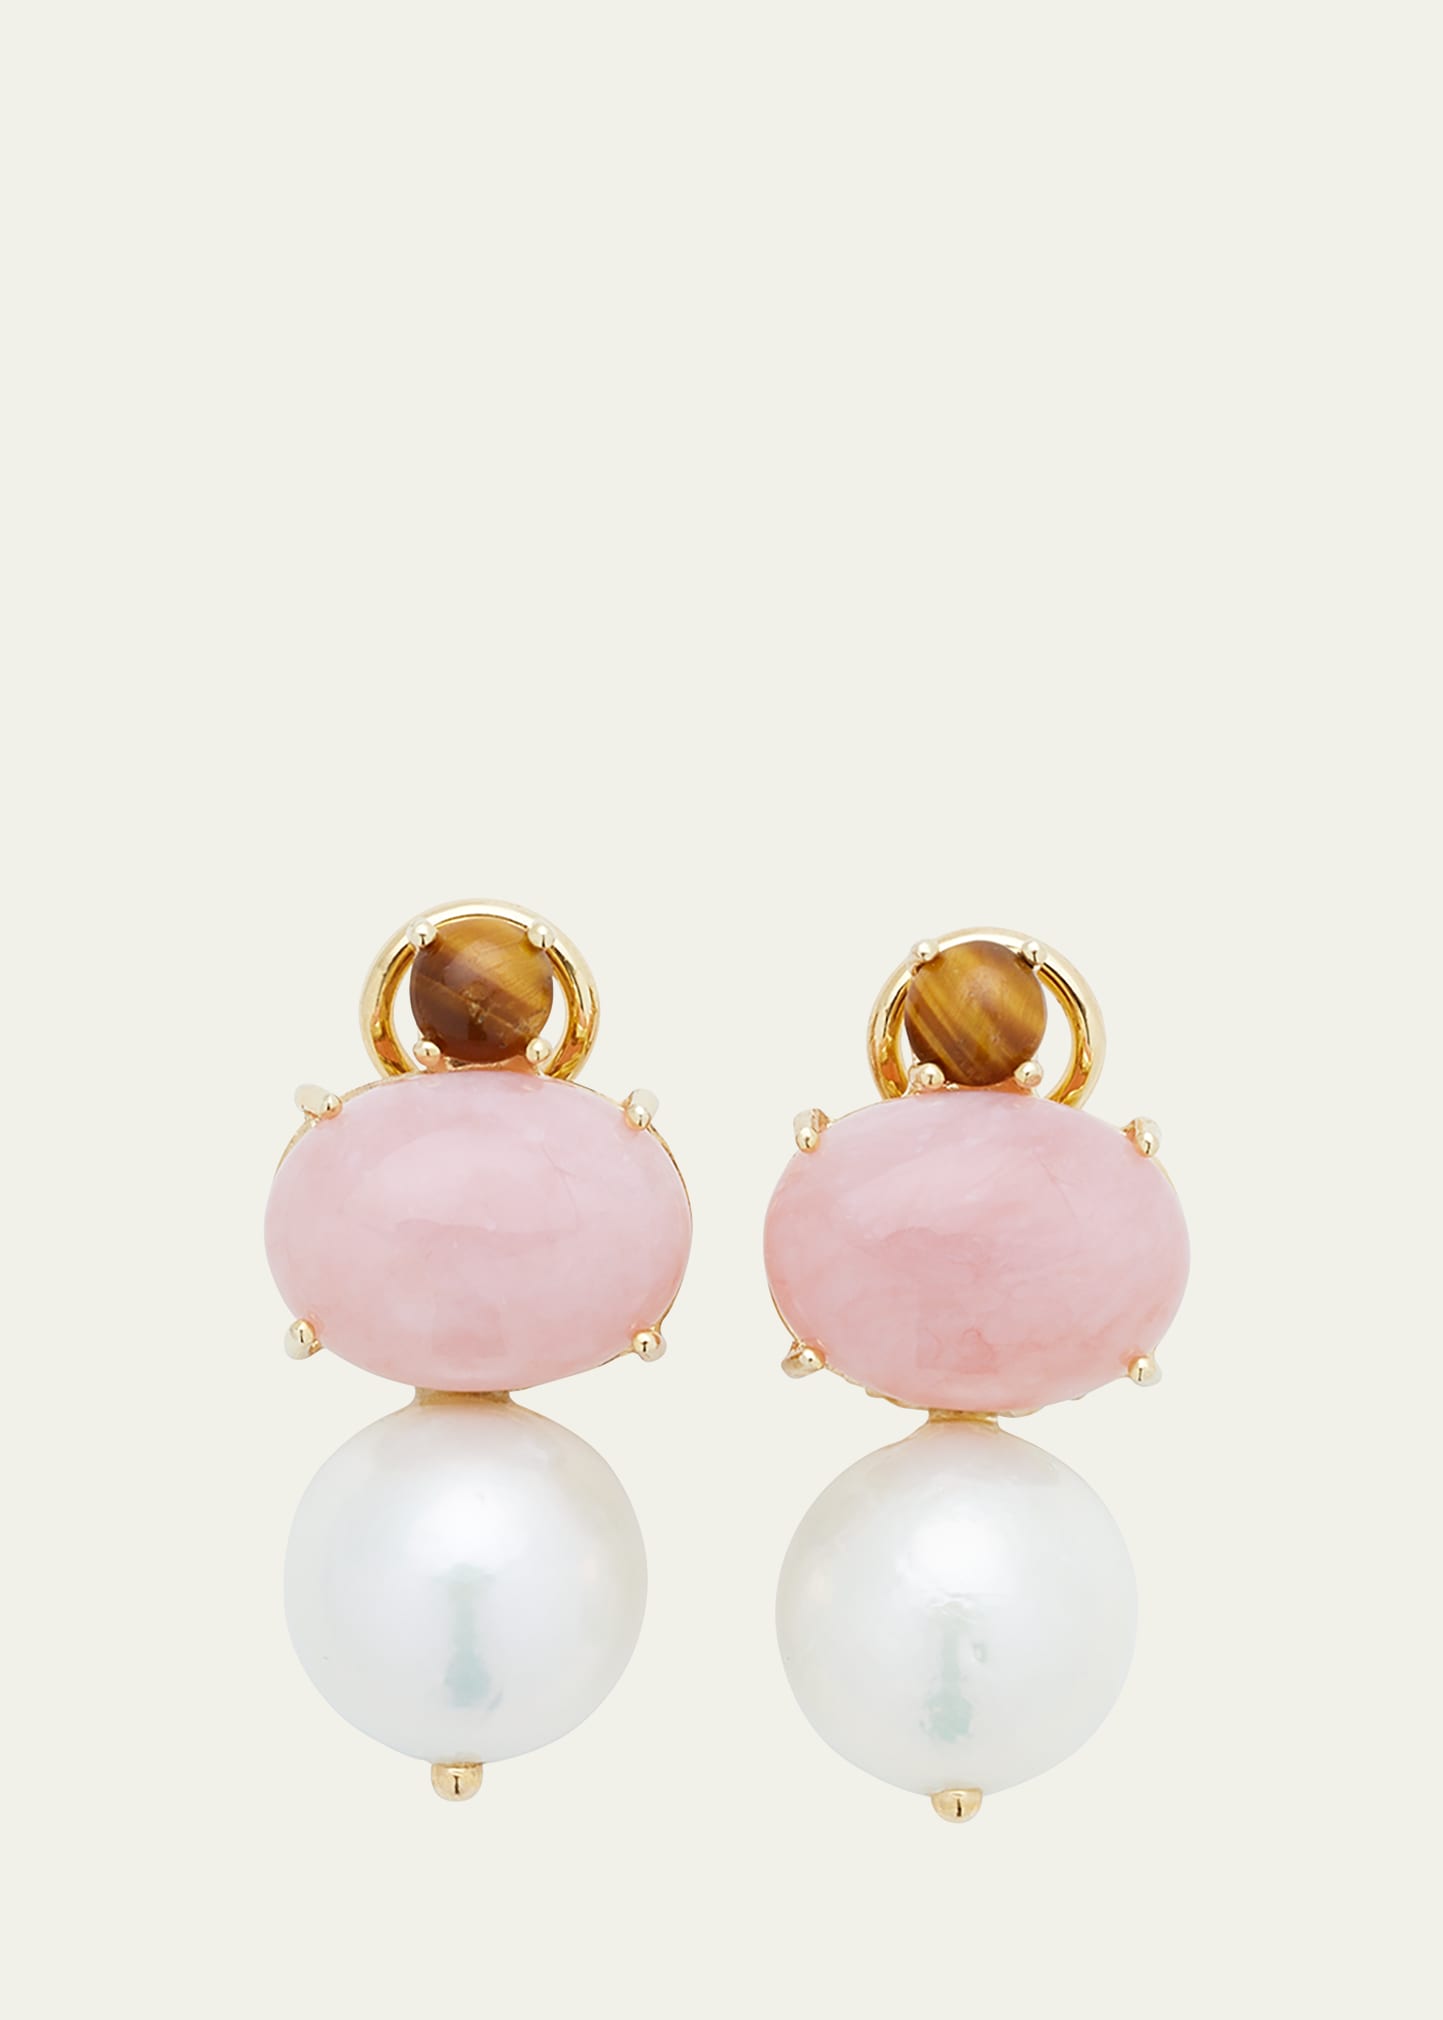 Grazia And Marica Vozza 14k Yellow Gold Stud Earrings With Rhodonite, Tiger Eye And Freshwater Pearls In Yg